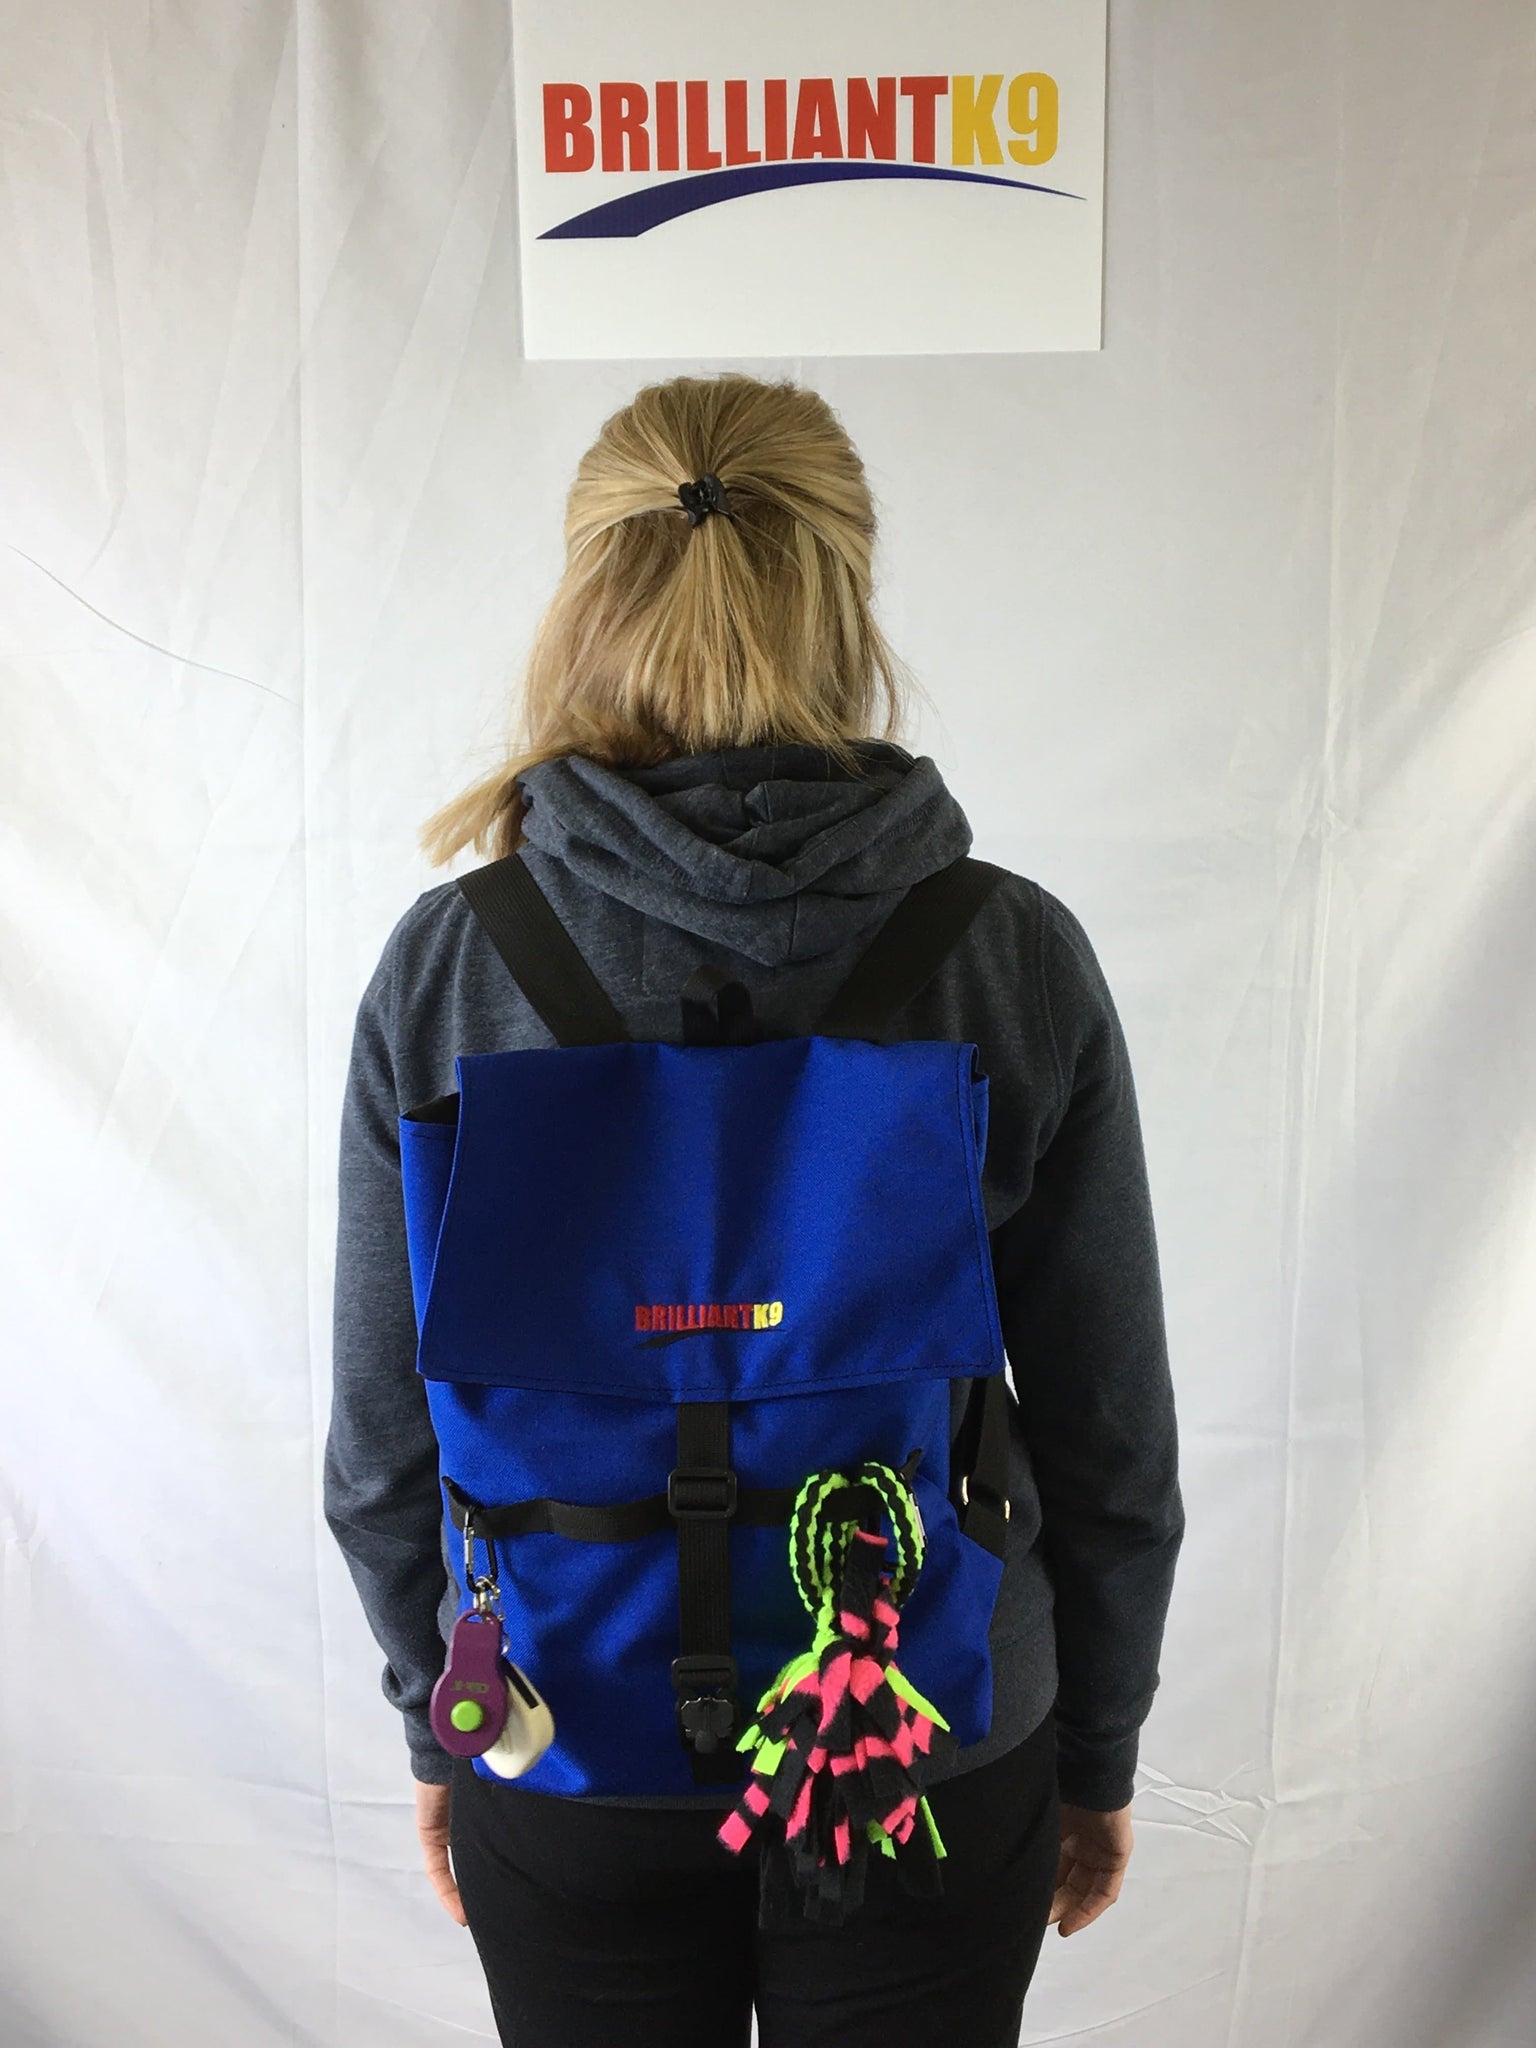 Custom Embroidered Backpack | Brilliant K9 Small Utility Backpack,Backpacks,BrilliantK9,BrilliantK9